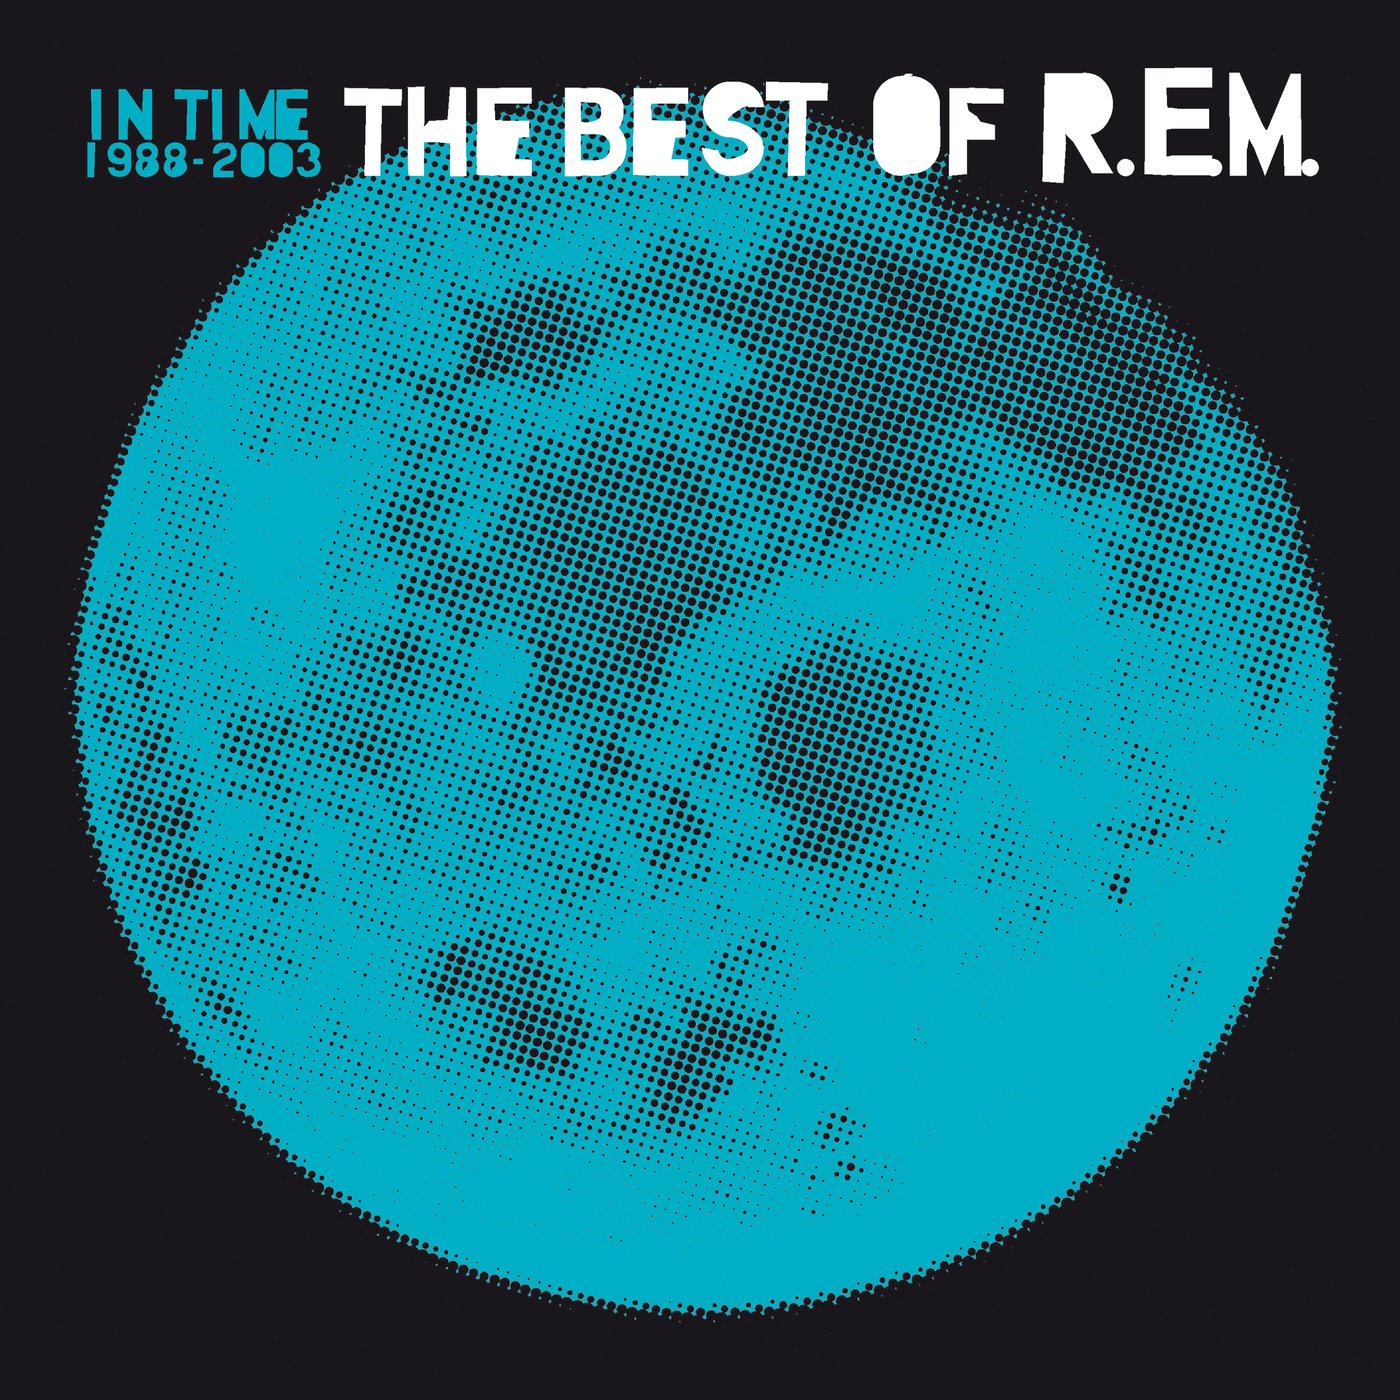 IN TIME: THE BEST OF R.E.M